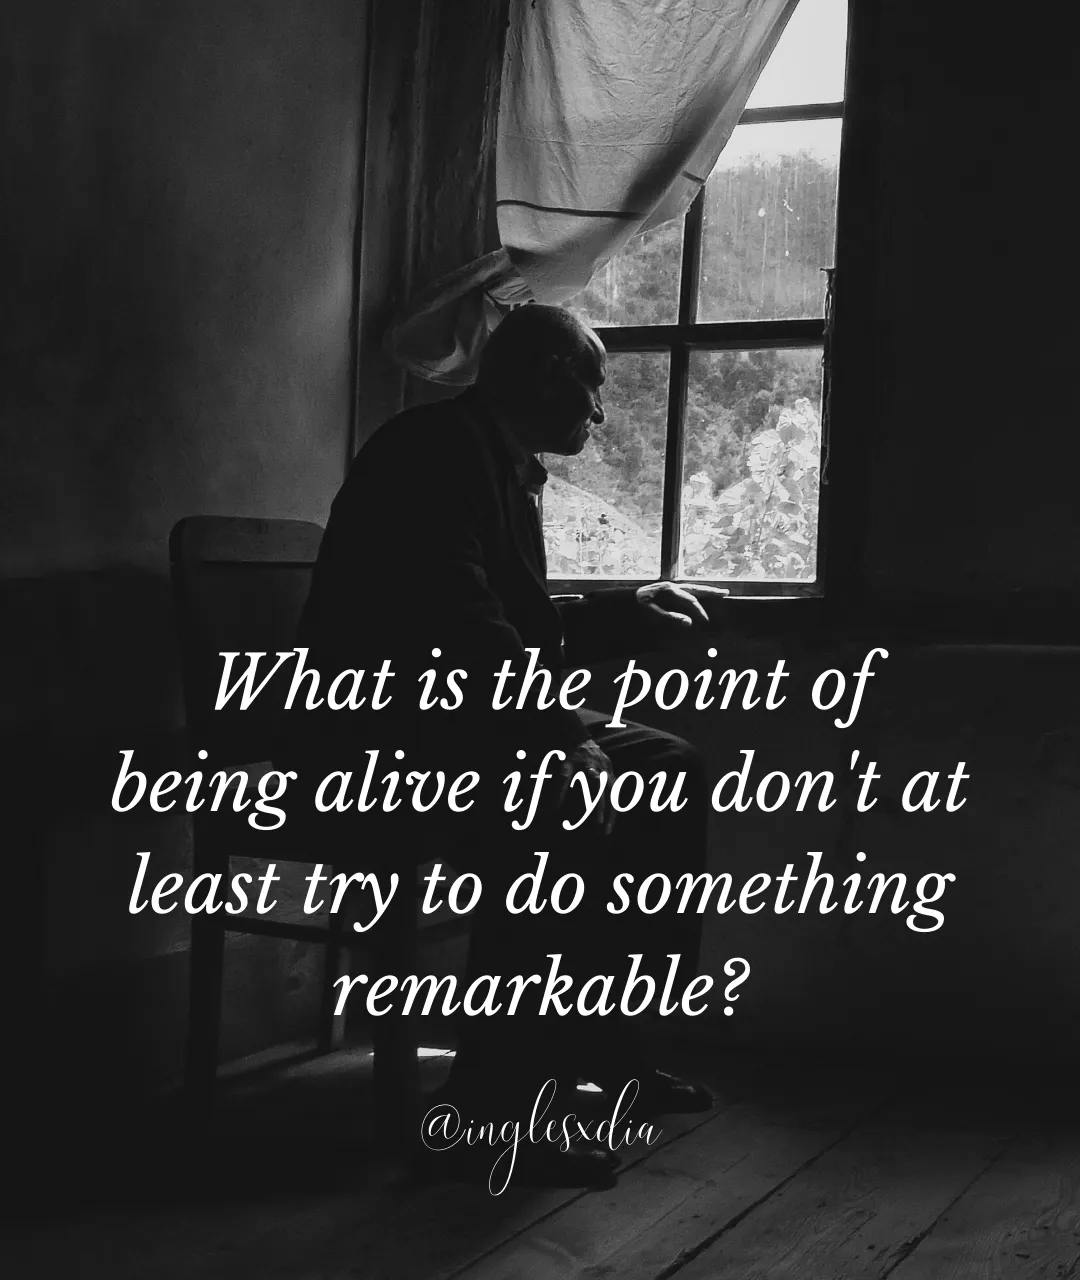 Frases motivadoras en inglés: What is the point of being alive if you don't at least try to do something remarkable?